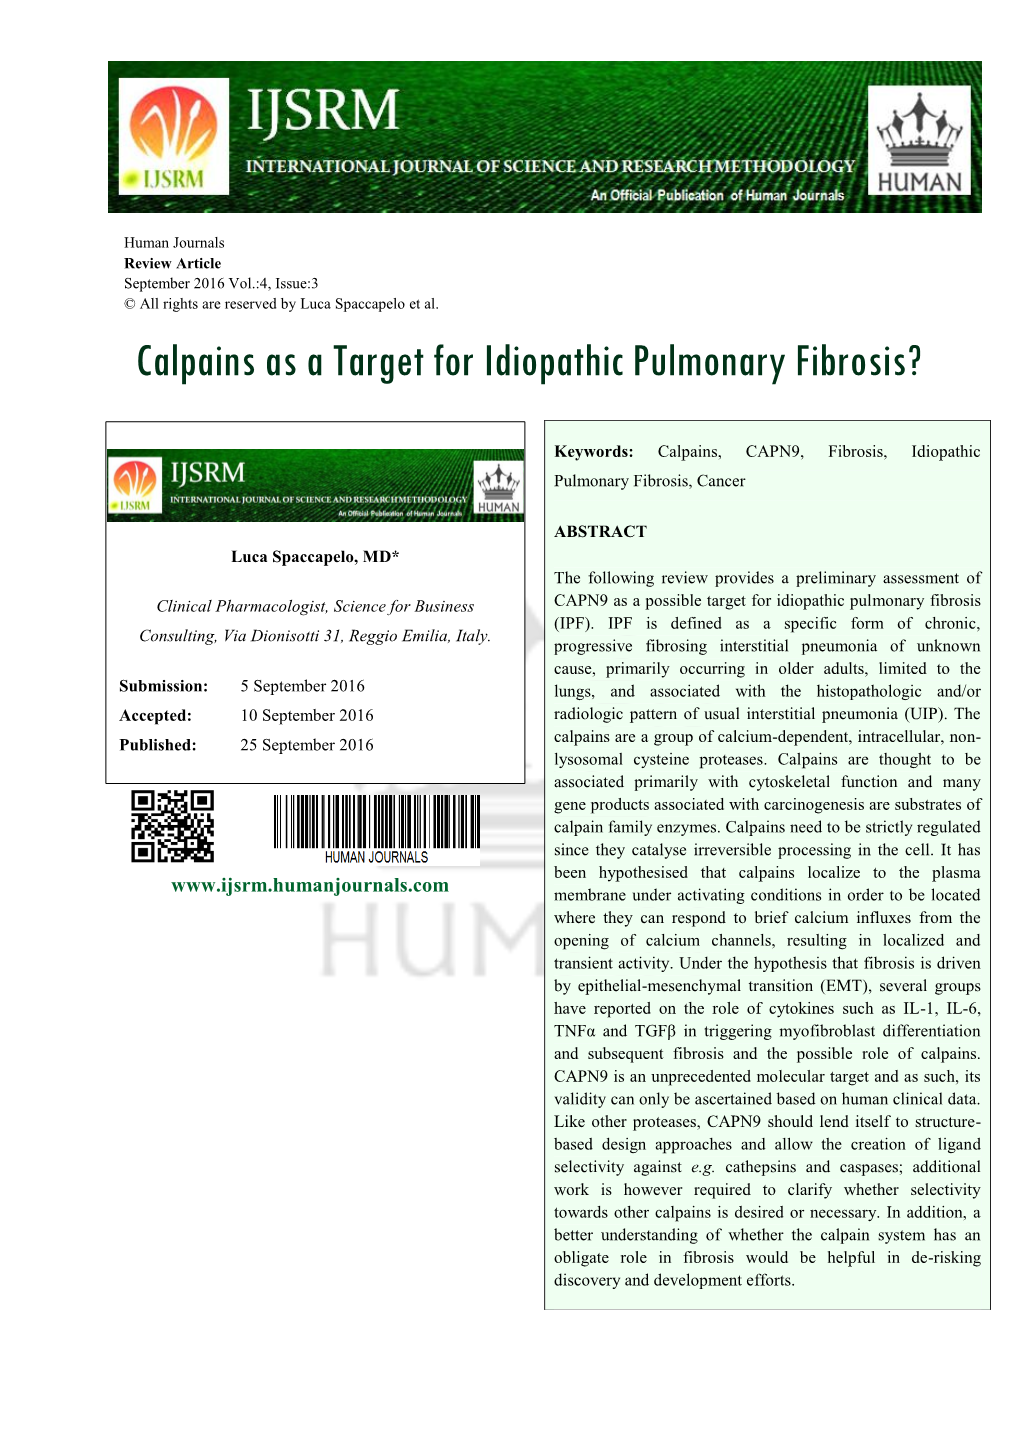 Calpains As a Target for Idiopathic Pulmonary Fibrosis?